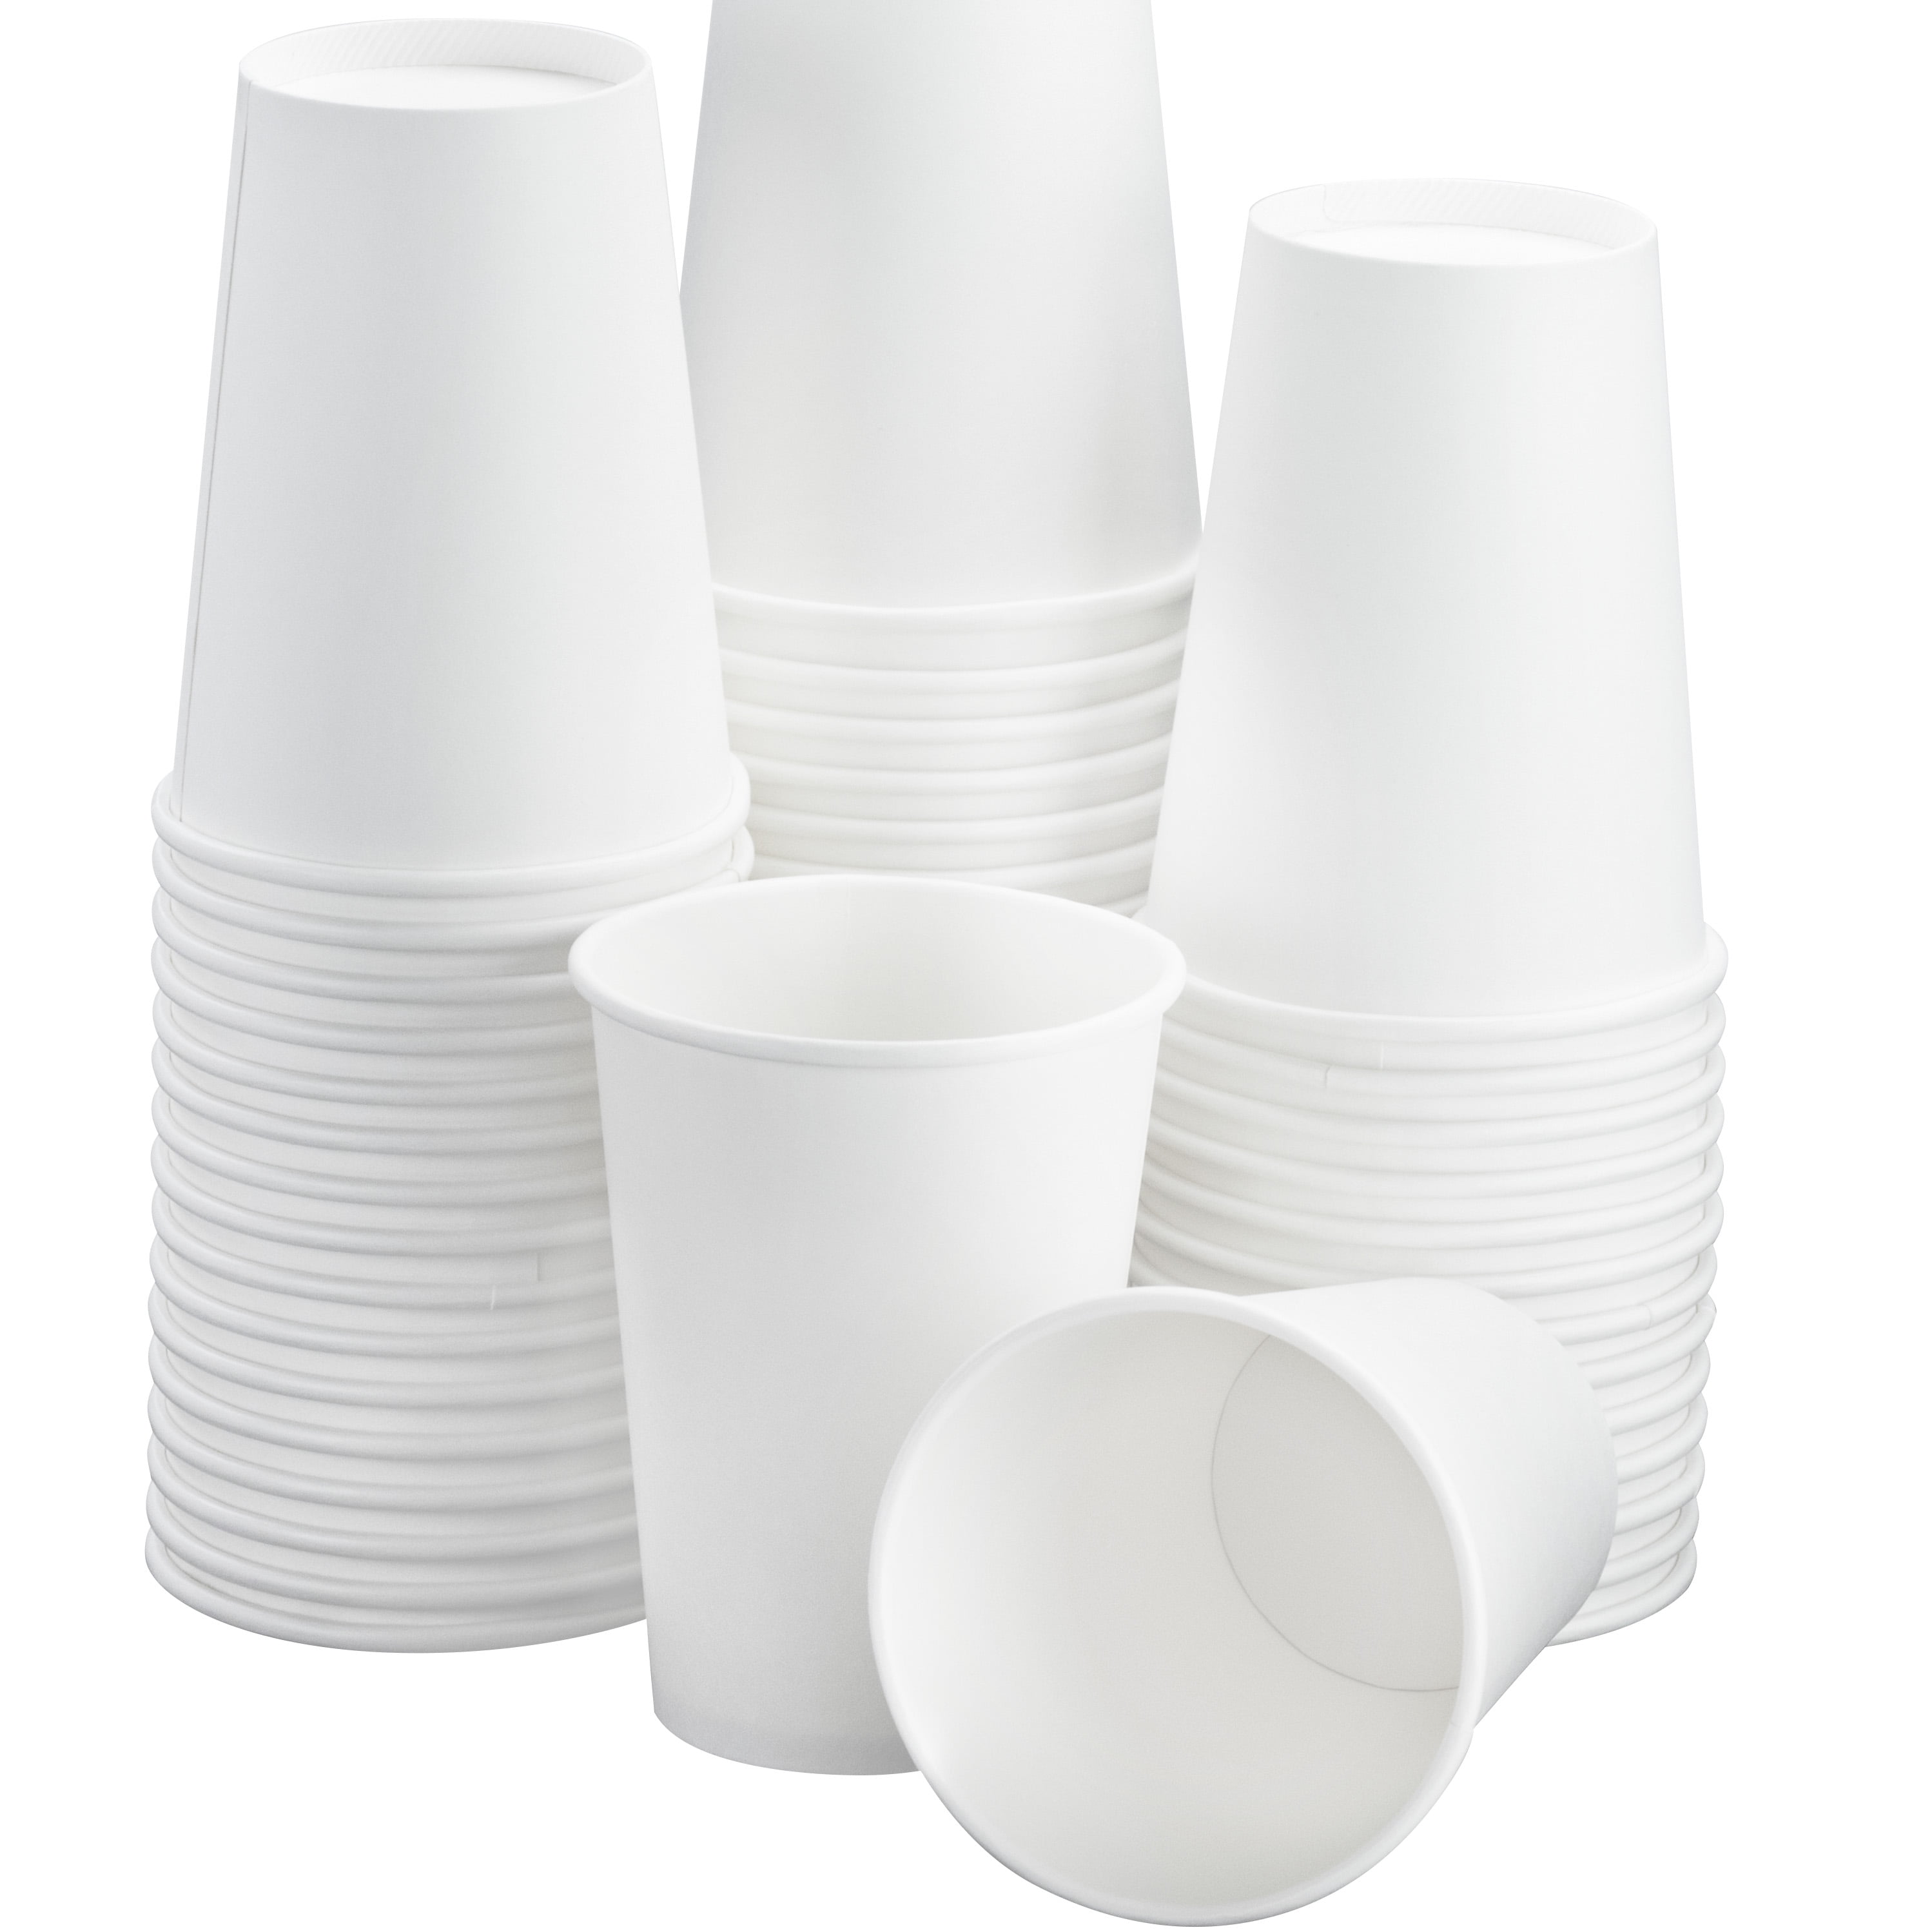 1000 x 8oz 12oz Disposable TABLEWARE PAPER CUPS WHITE Tea Coffee Cold Hot Drinks 